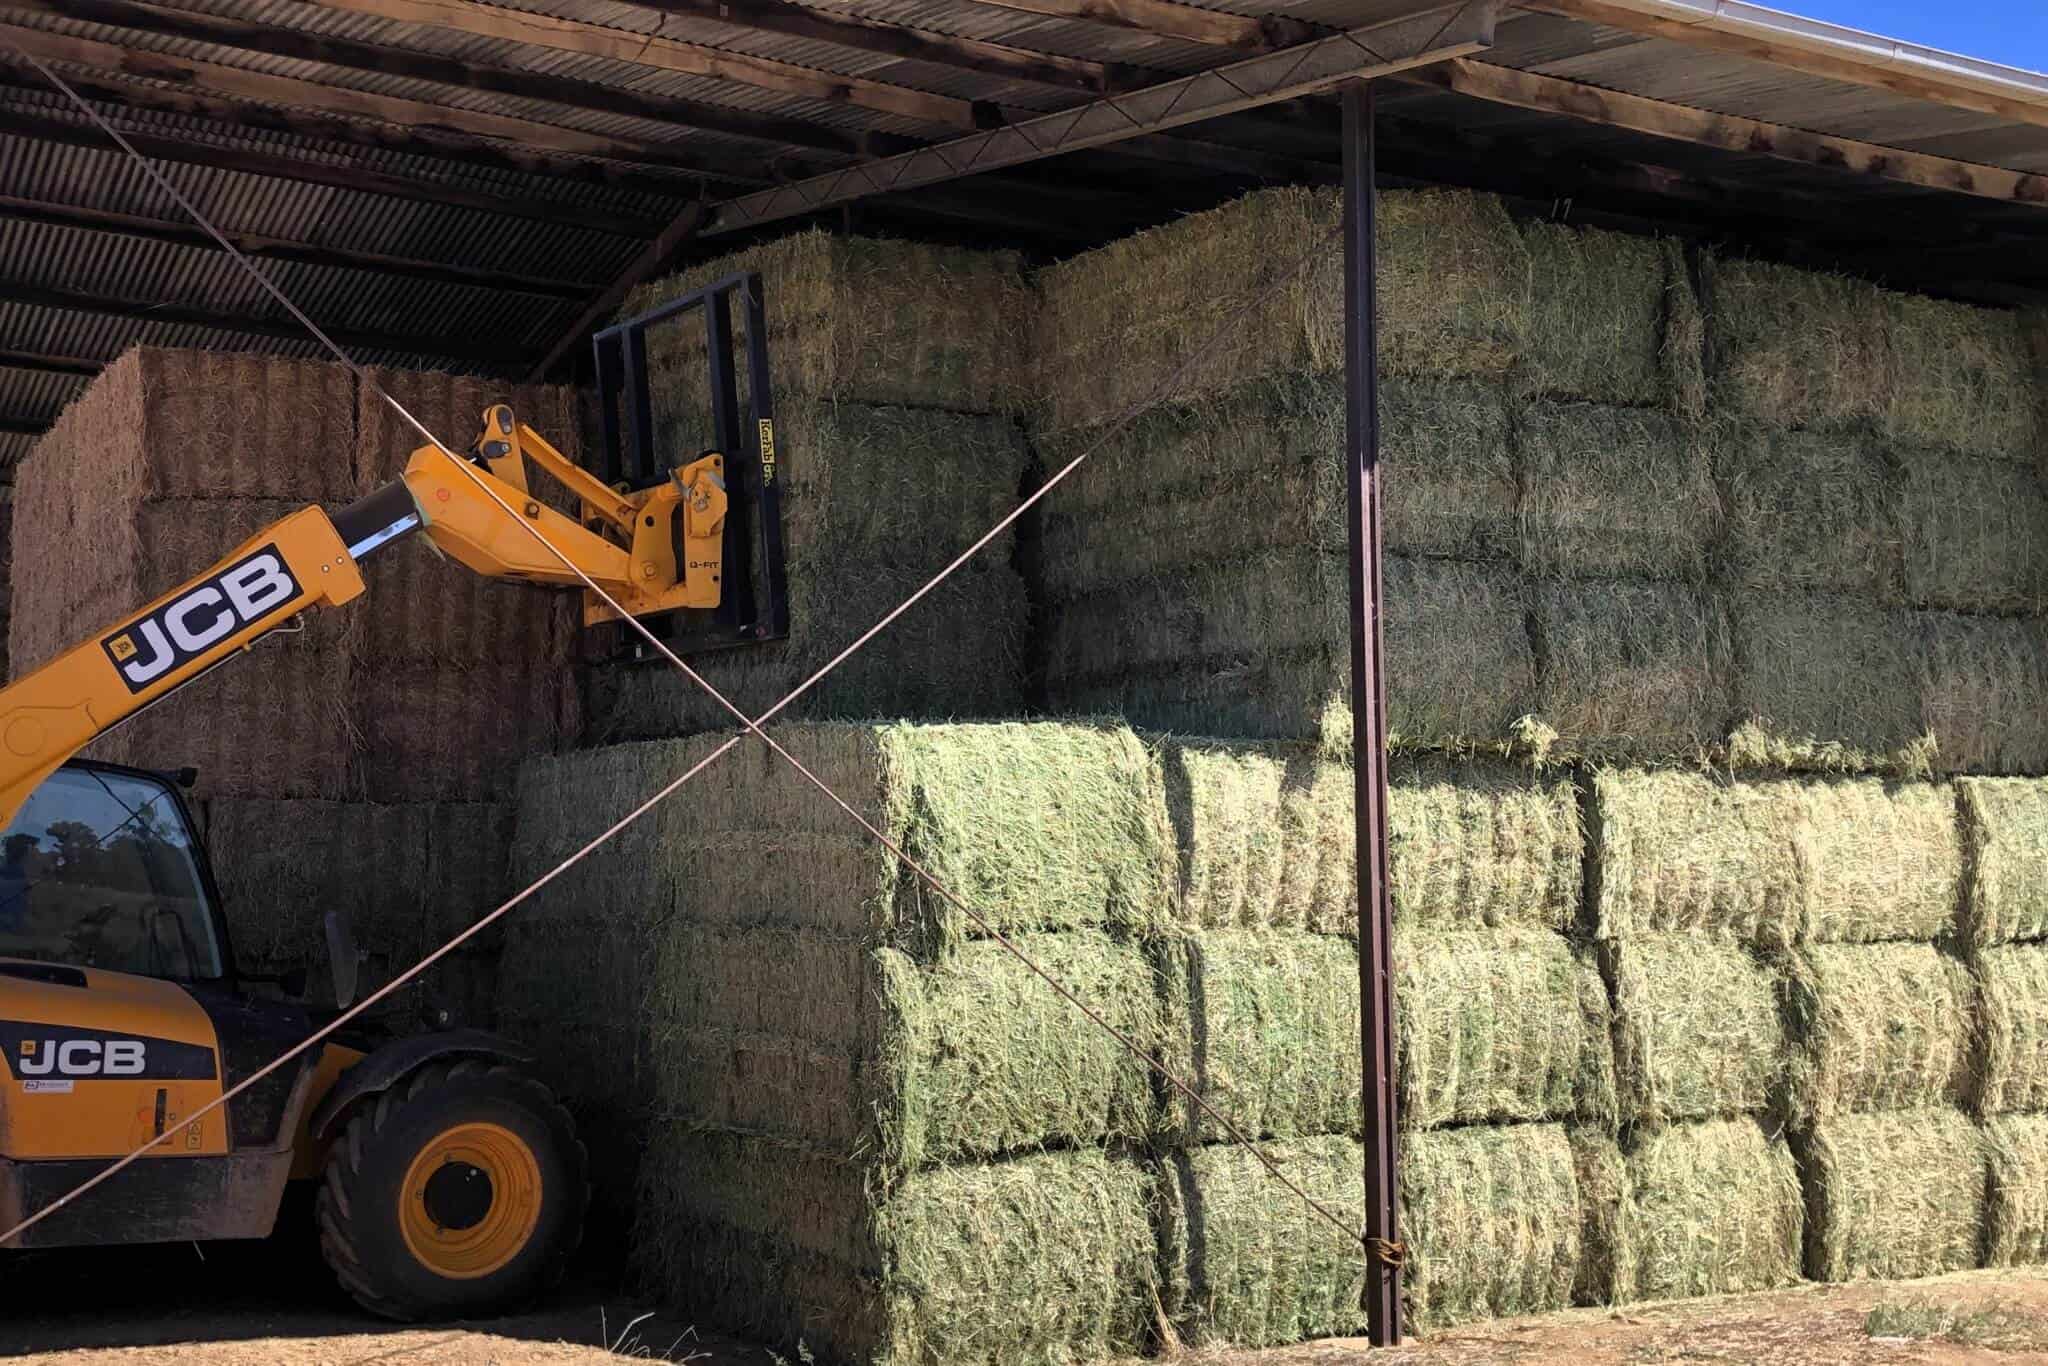 Bales of hay are stacked ready for sale and transport on the farm at Belubula Valley Hay